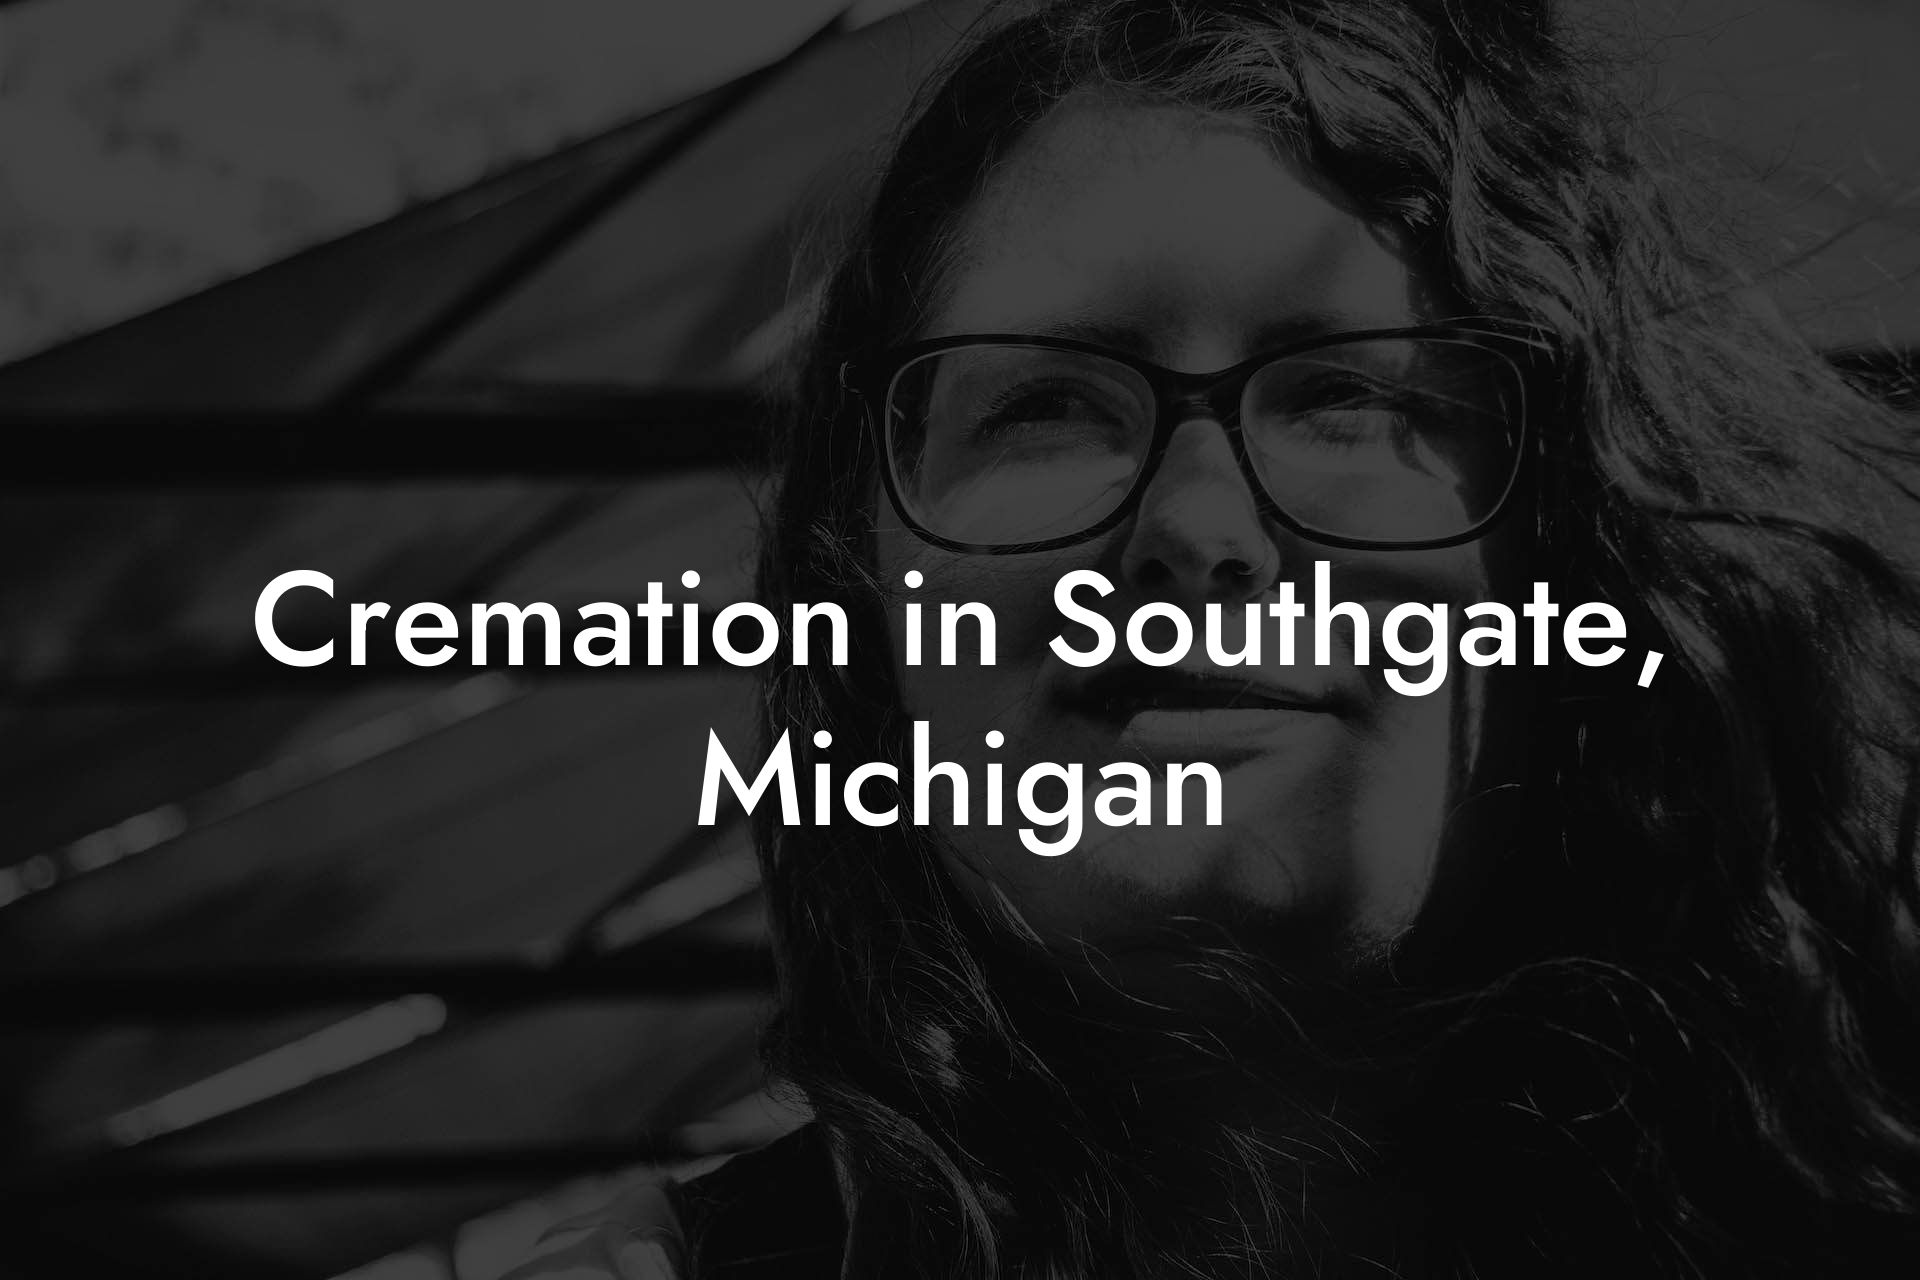 Cremation in Southgate, Michigan